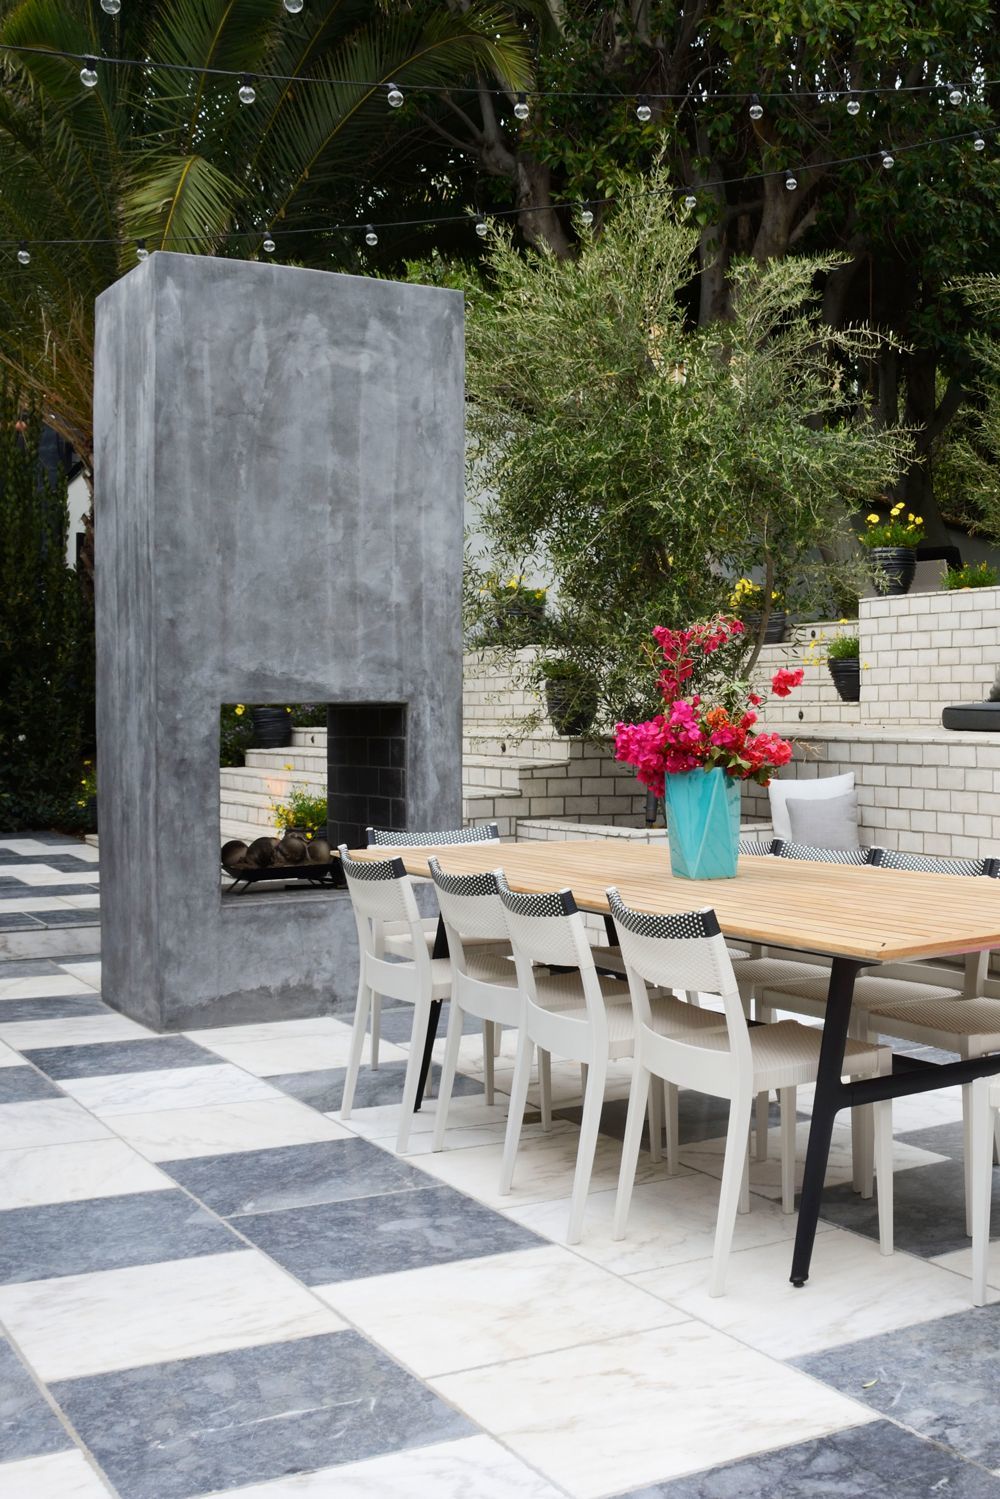 Patio ideas: stylish patio schemes & design tricks for a welcoming outdoor space